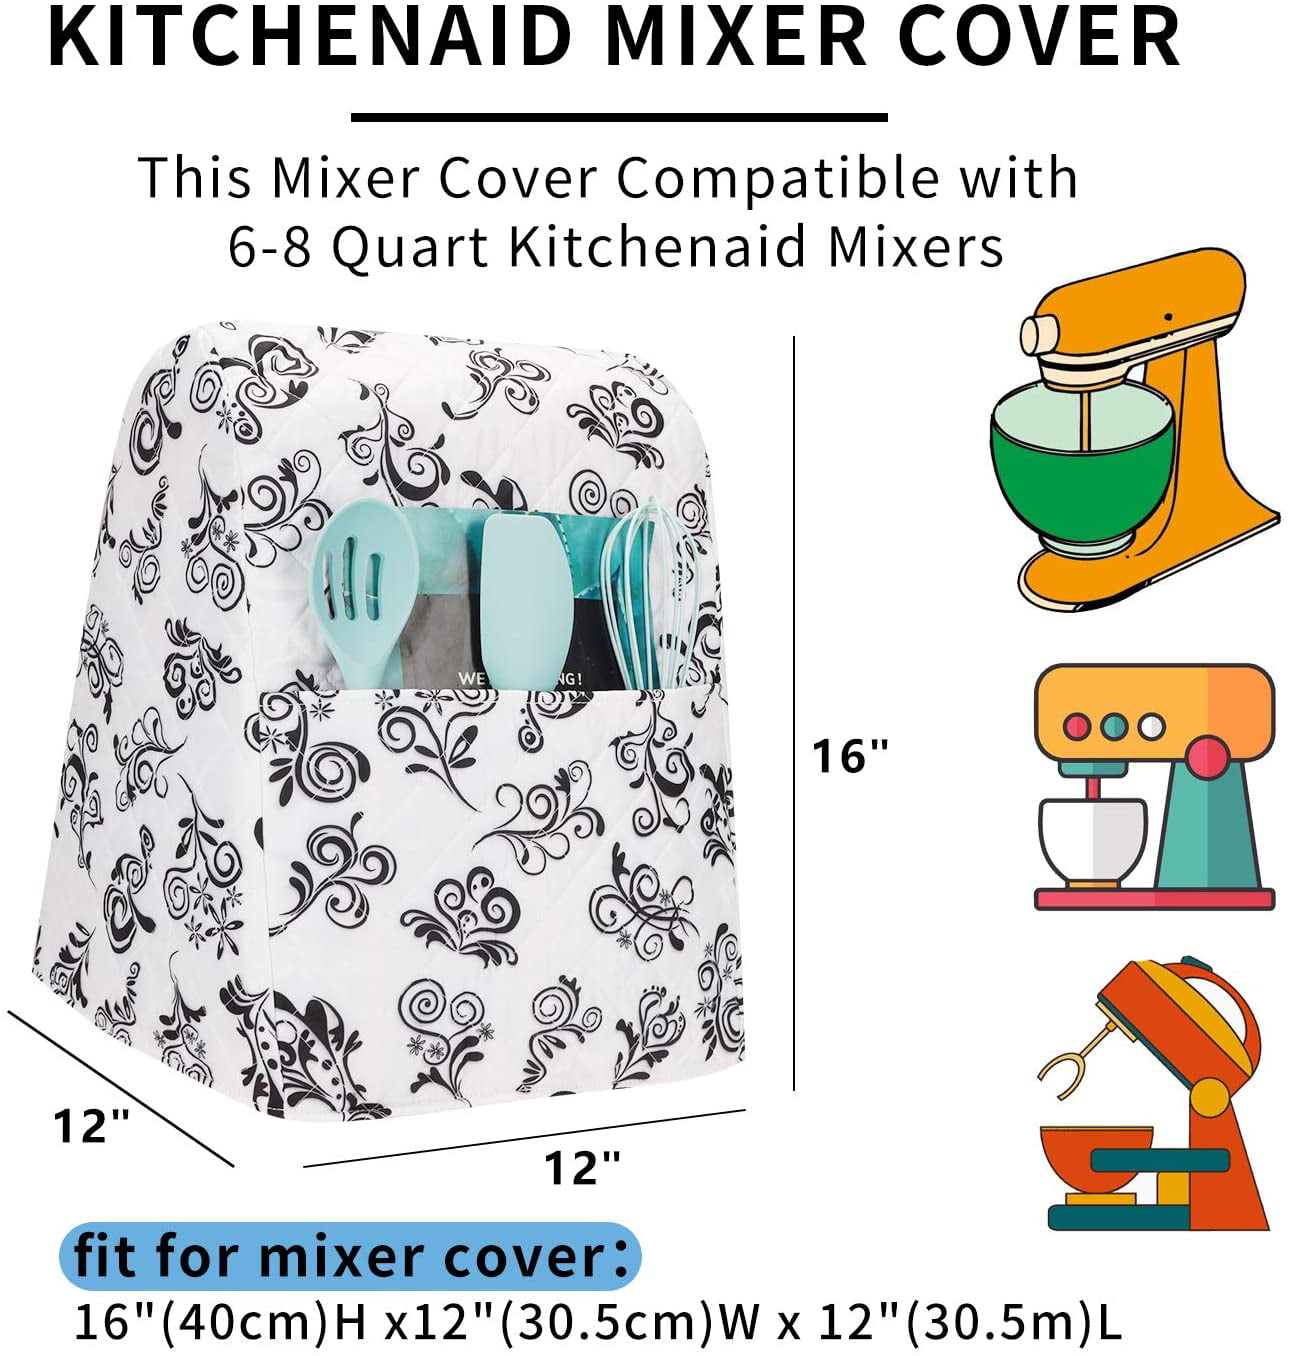 Y01 Kitchen Aid Mixer Dust Cover,Stand Mixer Small Appliances Cover with Pockets,Compatible with All Tilt Head&Bowl Lift 5-8 Quart Kitchen Aid Mixers for Kitchenaid Mixers,Hamilton Mixers 